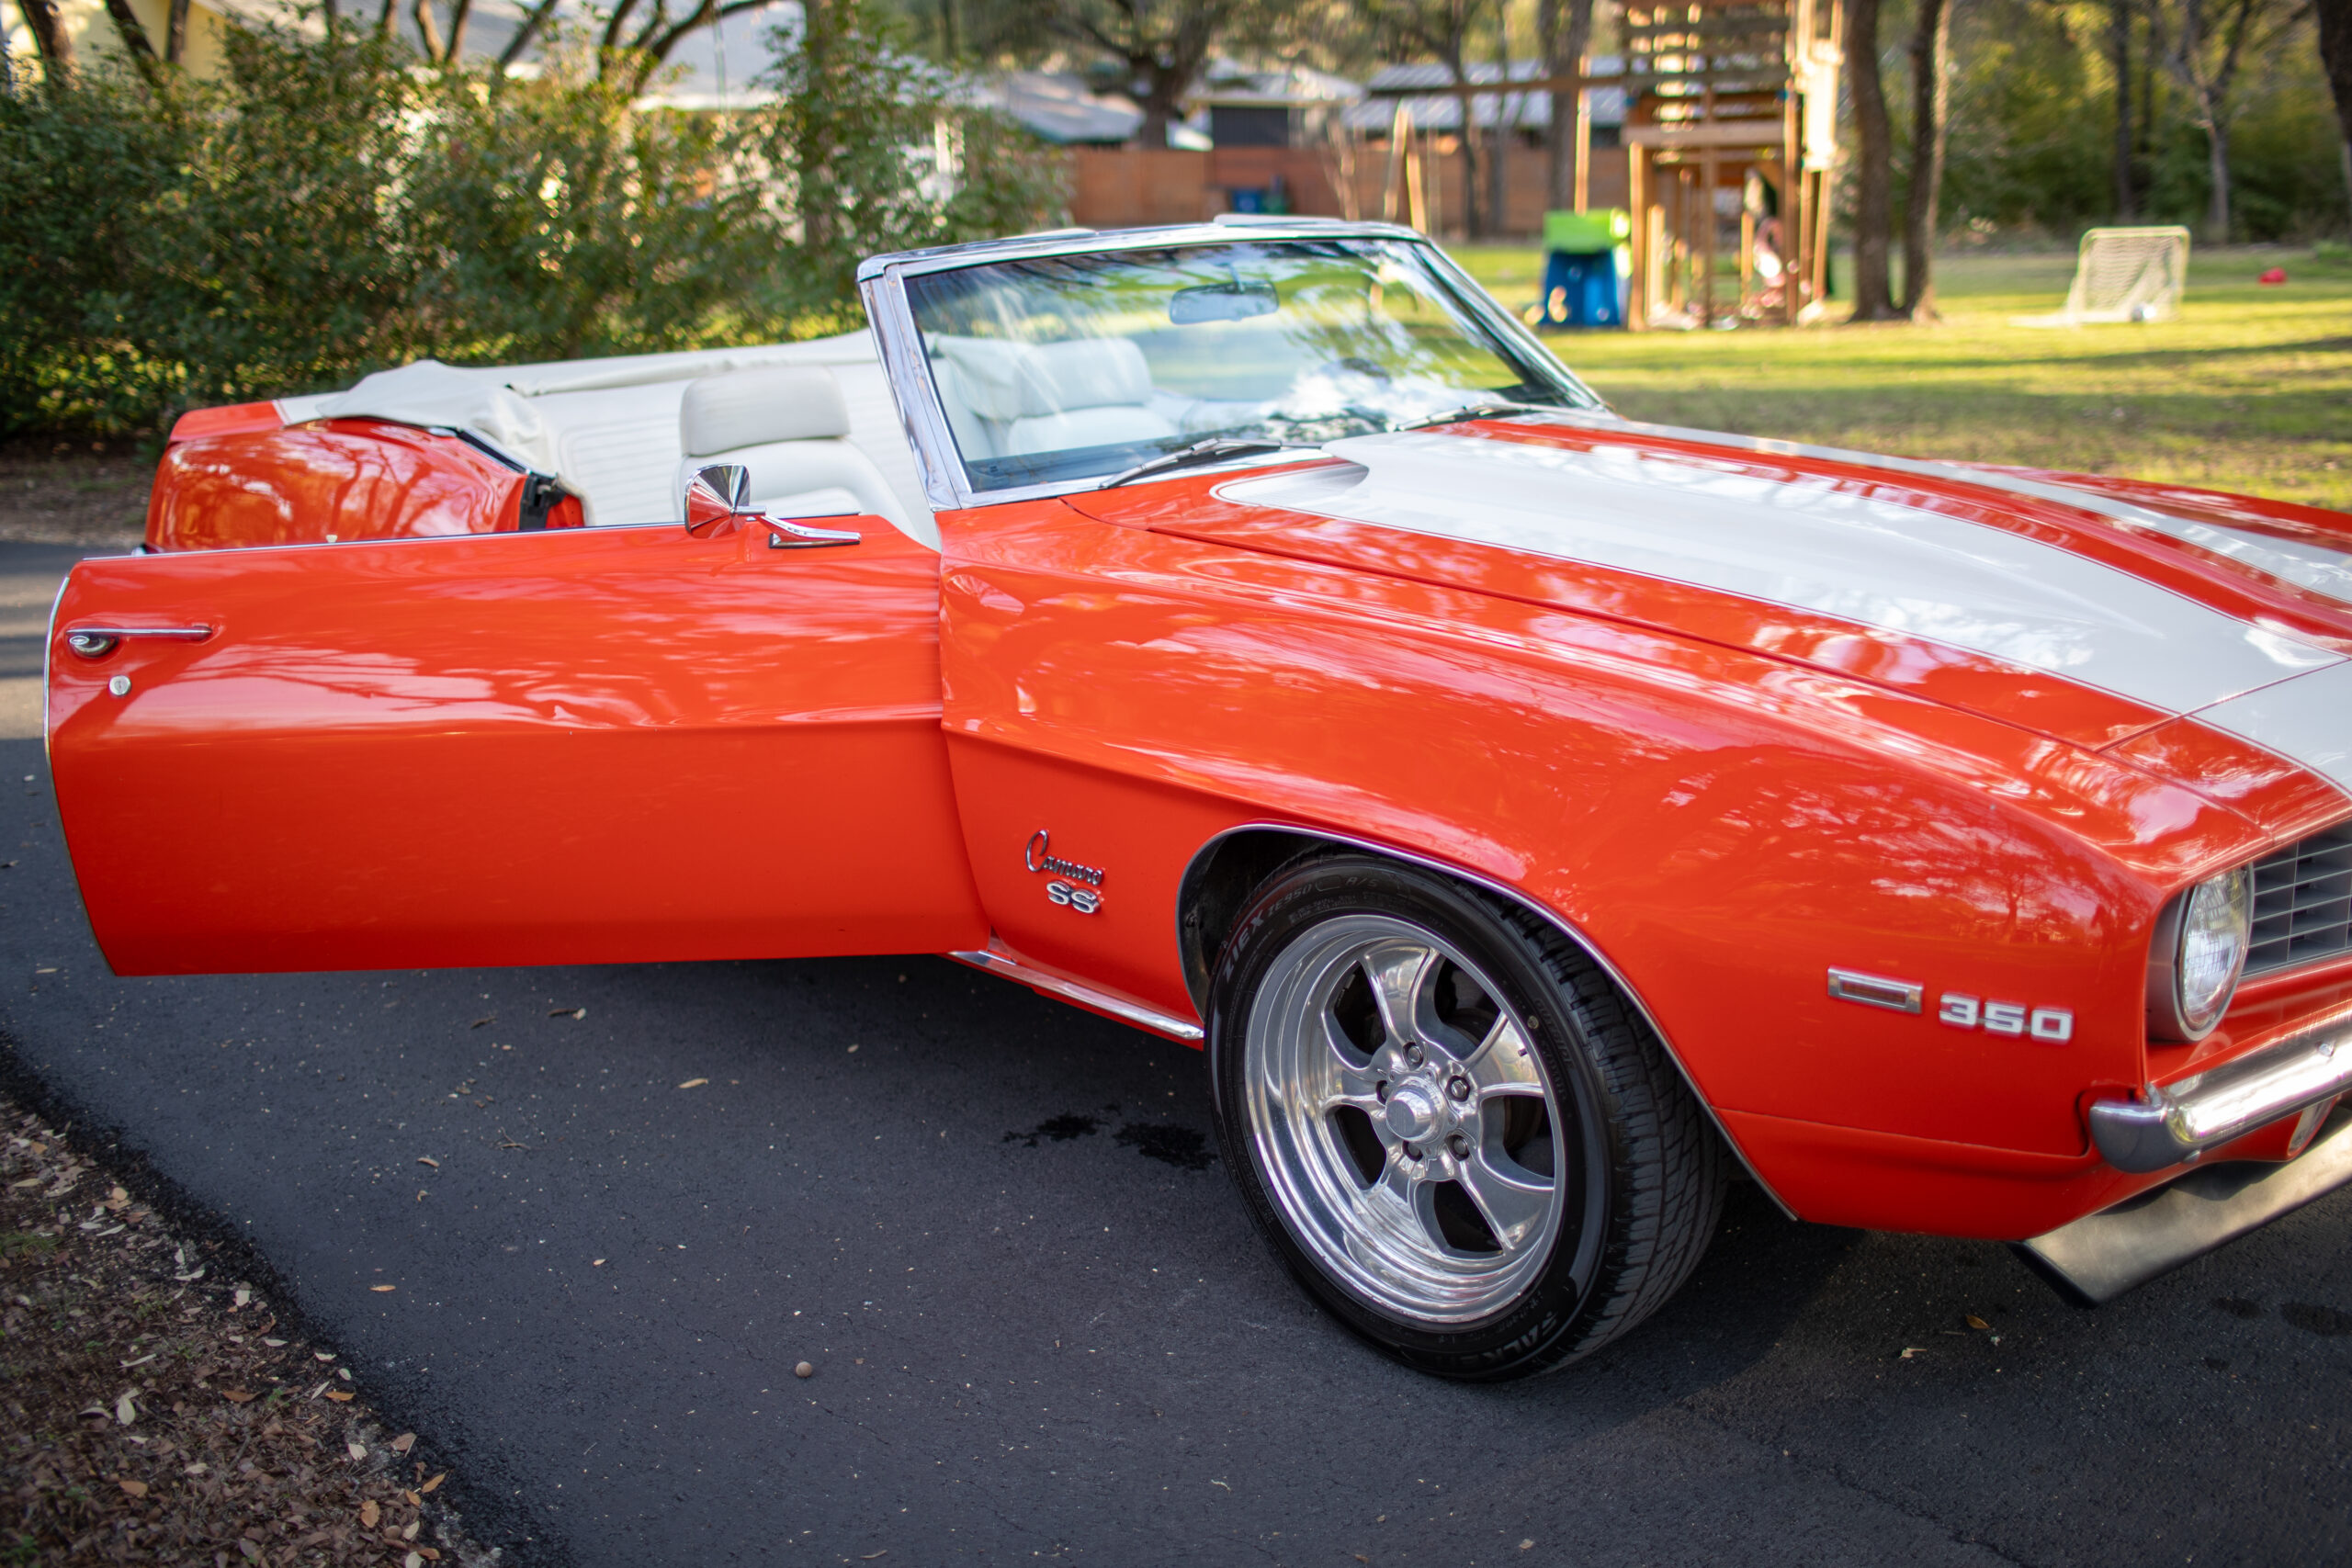 A bright orange vintage convertible car with white racing stripes has its driver's side door open. The car is parked on a paved surface with trees and a playset visible in the background.